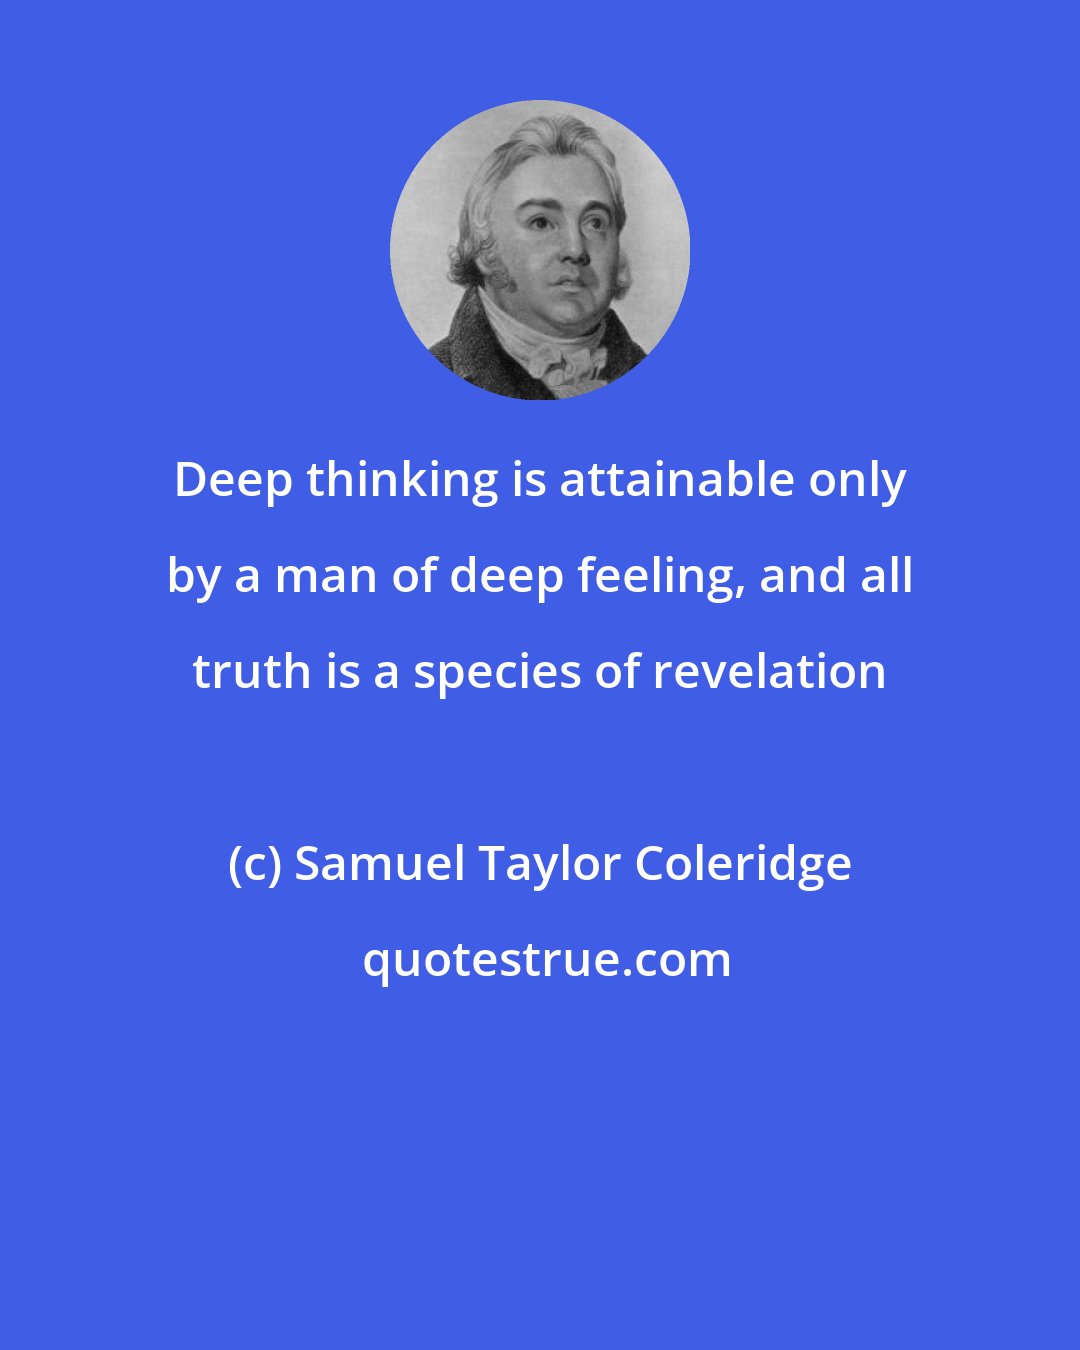 Samuel Taylor Coleridge: Deep thinking is attainable only by a man of deep feeling, and all truth is a species of revelation